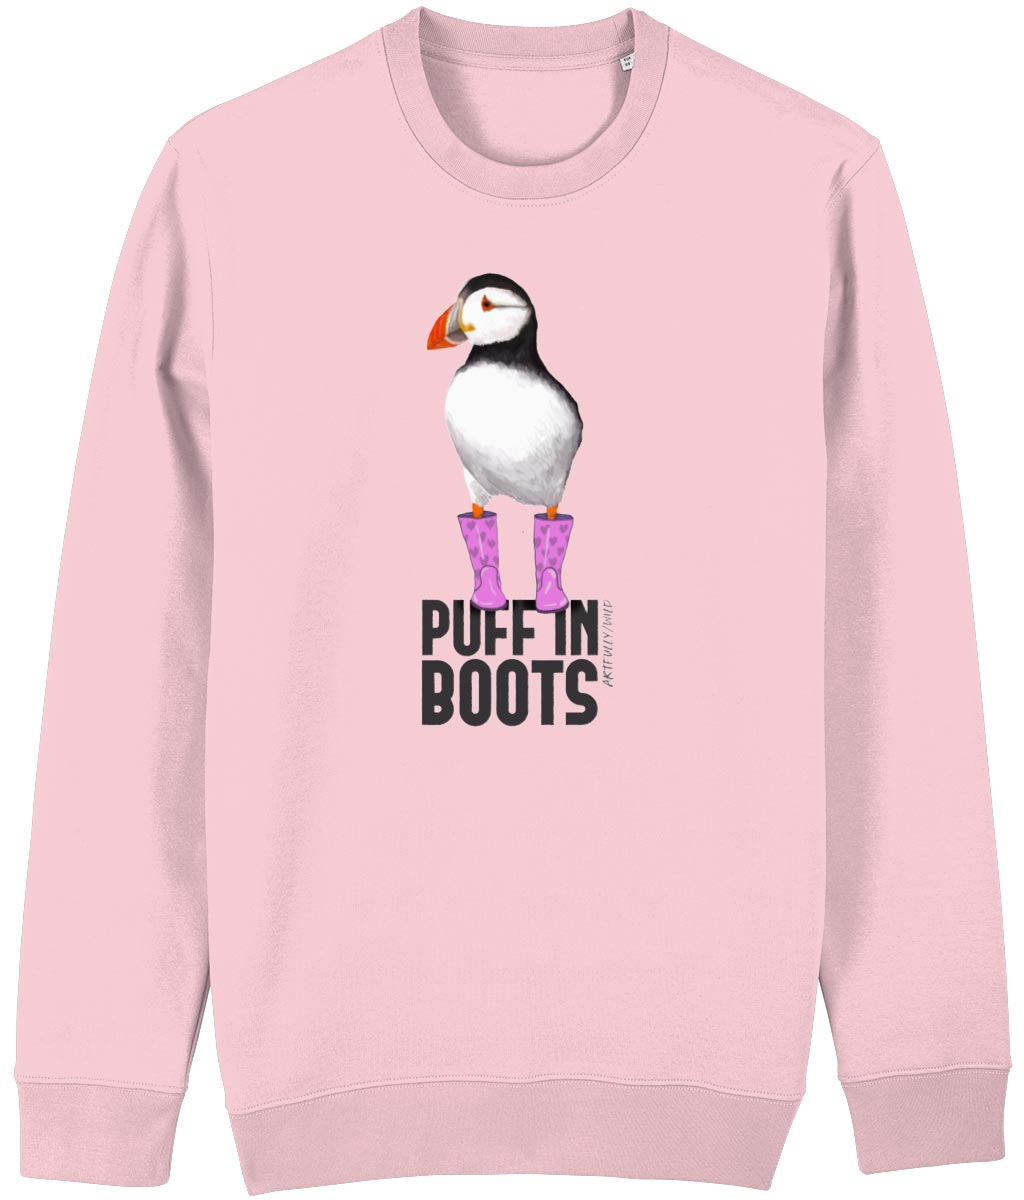 PUFF IN PINK BOOTS Organic Cotton Pink Unisex Sky Blue Crew Neck Sweatshirt. Printed with eco-friendly water-based Inks. Original Design by Artfully Wild.